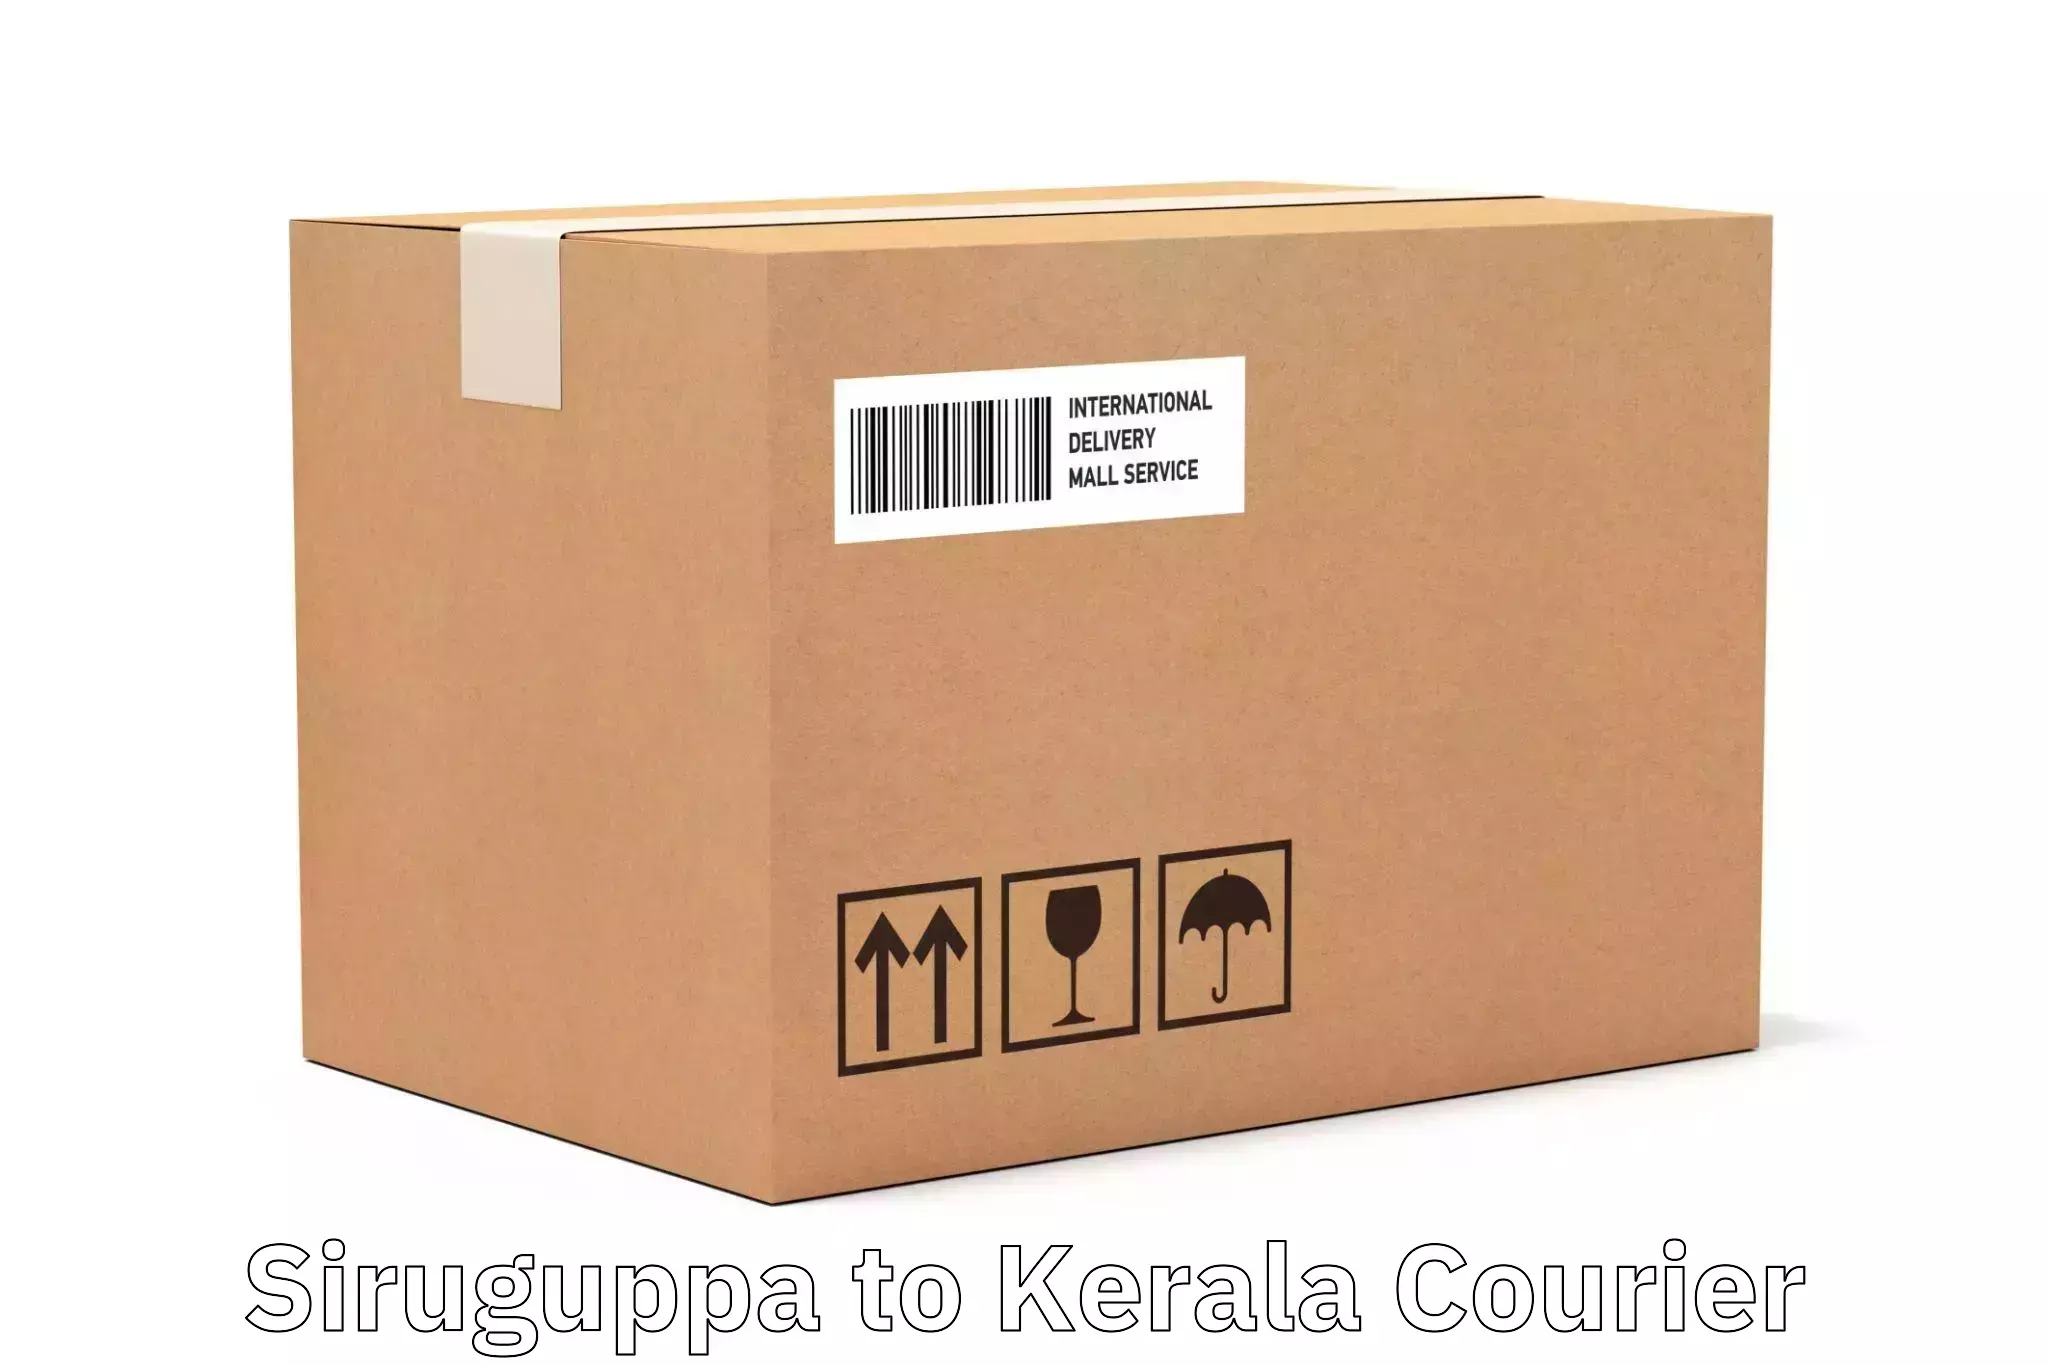 Express delivery network Siruguppa to Kerala